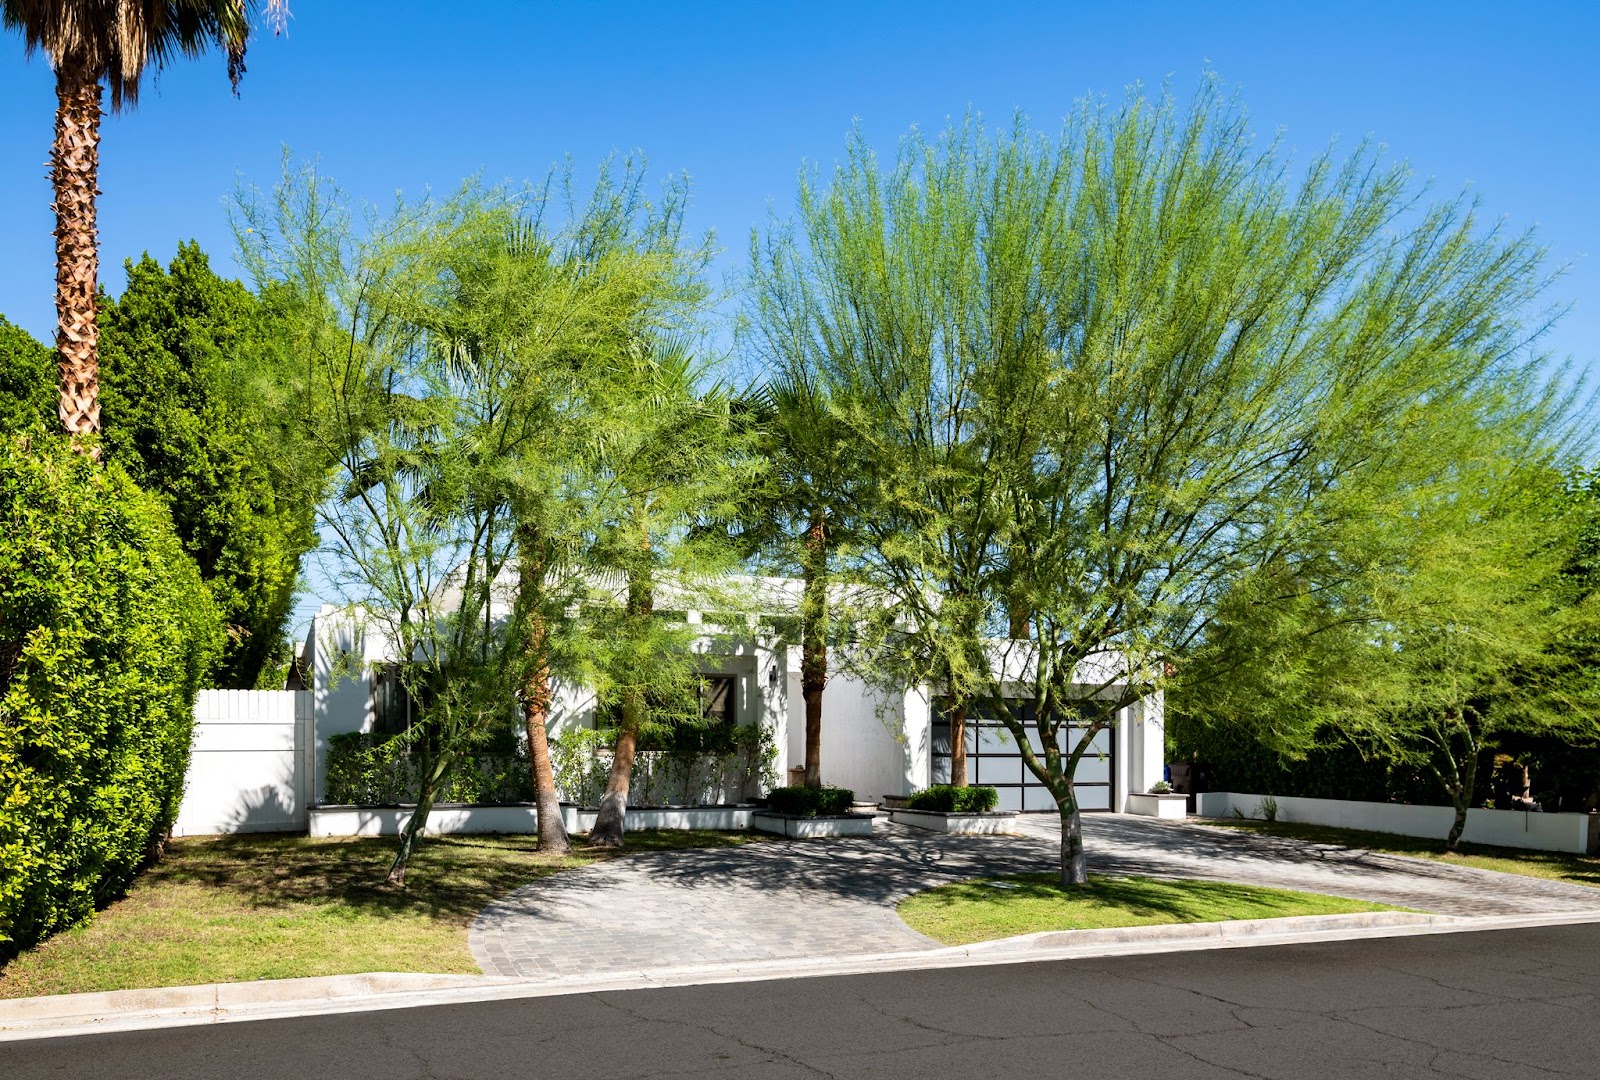 Rental home in the Tahquitz River Estates neighborhood of Palm Springs, California. 